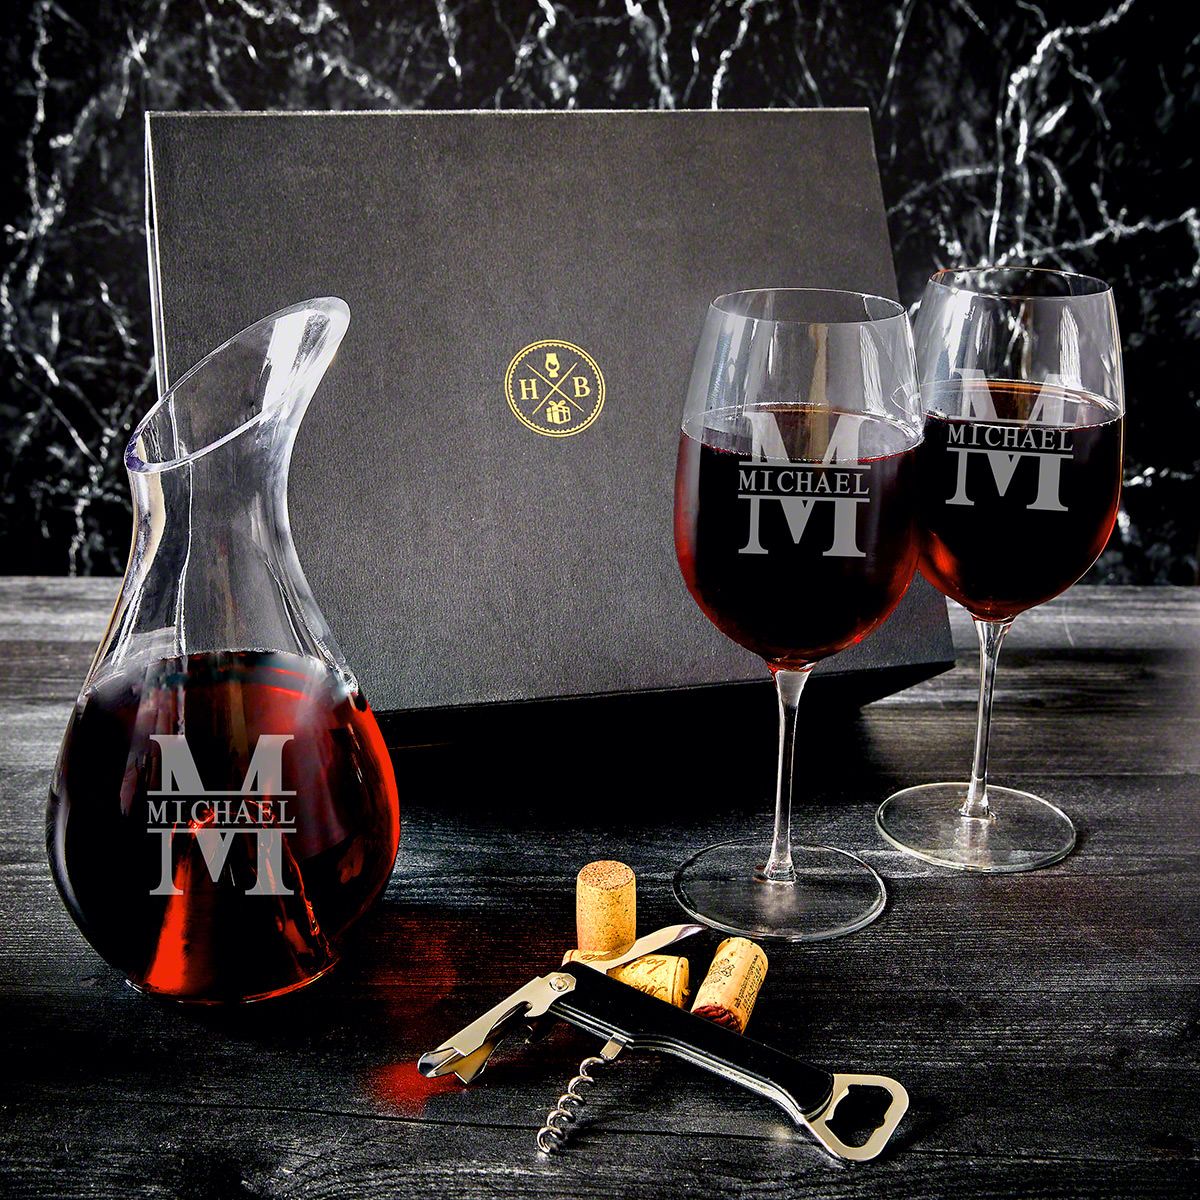 Double-Wall Wine Saver Decanter and Glasses Set - Personalized Morgan Design by Wine Enthusiast